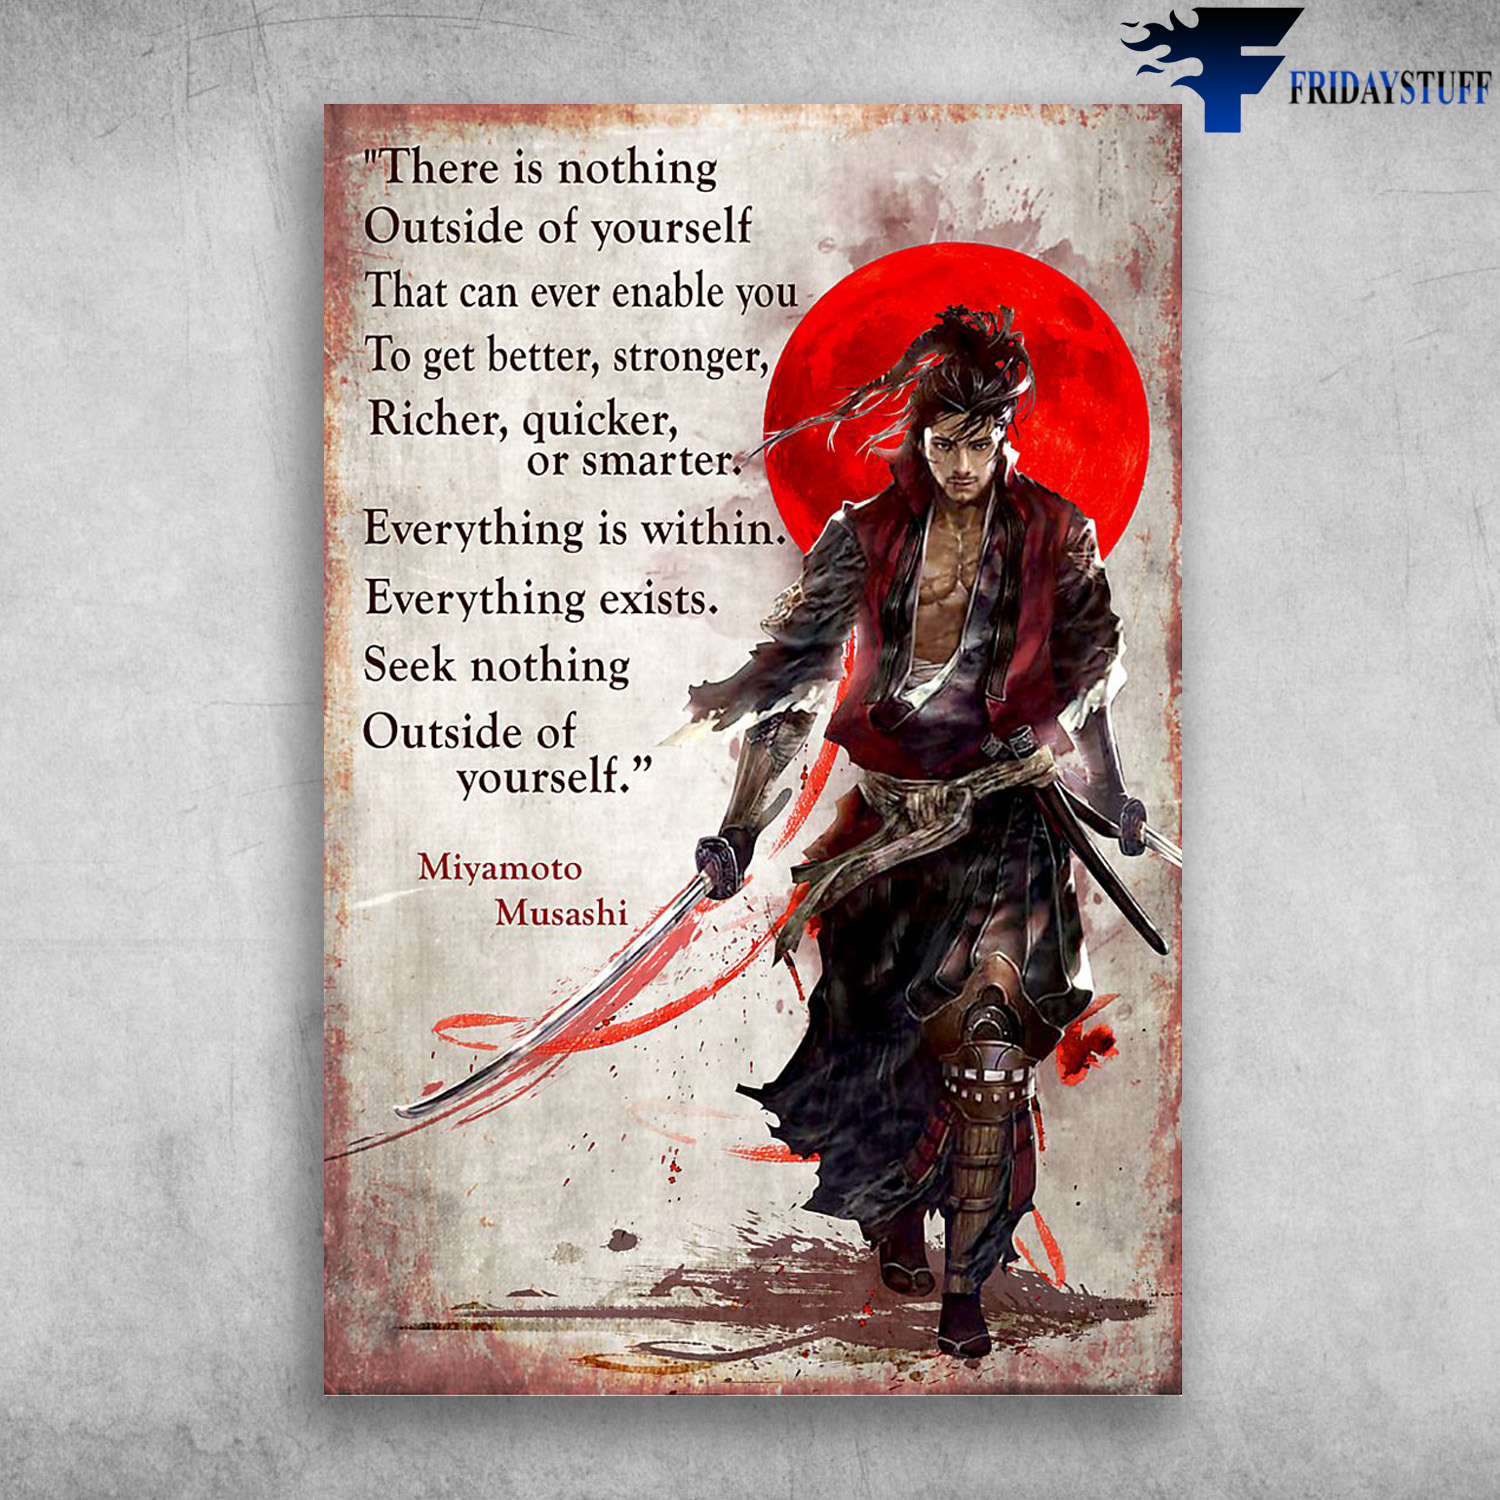 The Swordsman - There Is Nothing, Outside Of Yourself, That Can Ever Enable You, To Get Better, Stronger, Richer, Quicker, Or Smarter, Everything Is Within, Everything Exists, Seek Nothing Outside Of Yourself, Miyamoto Musashi